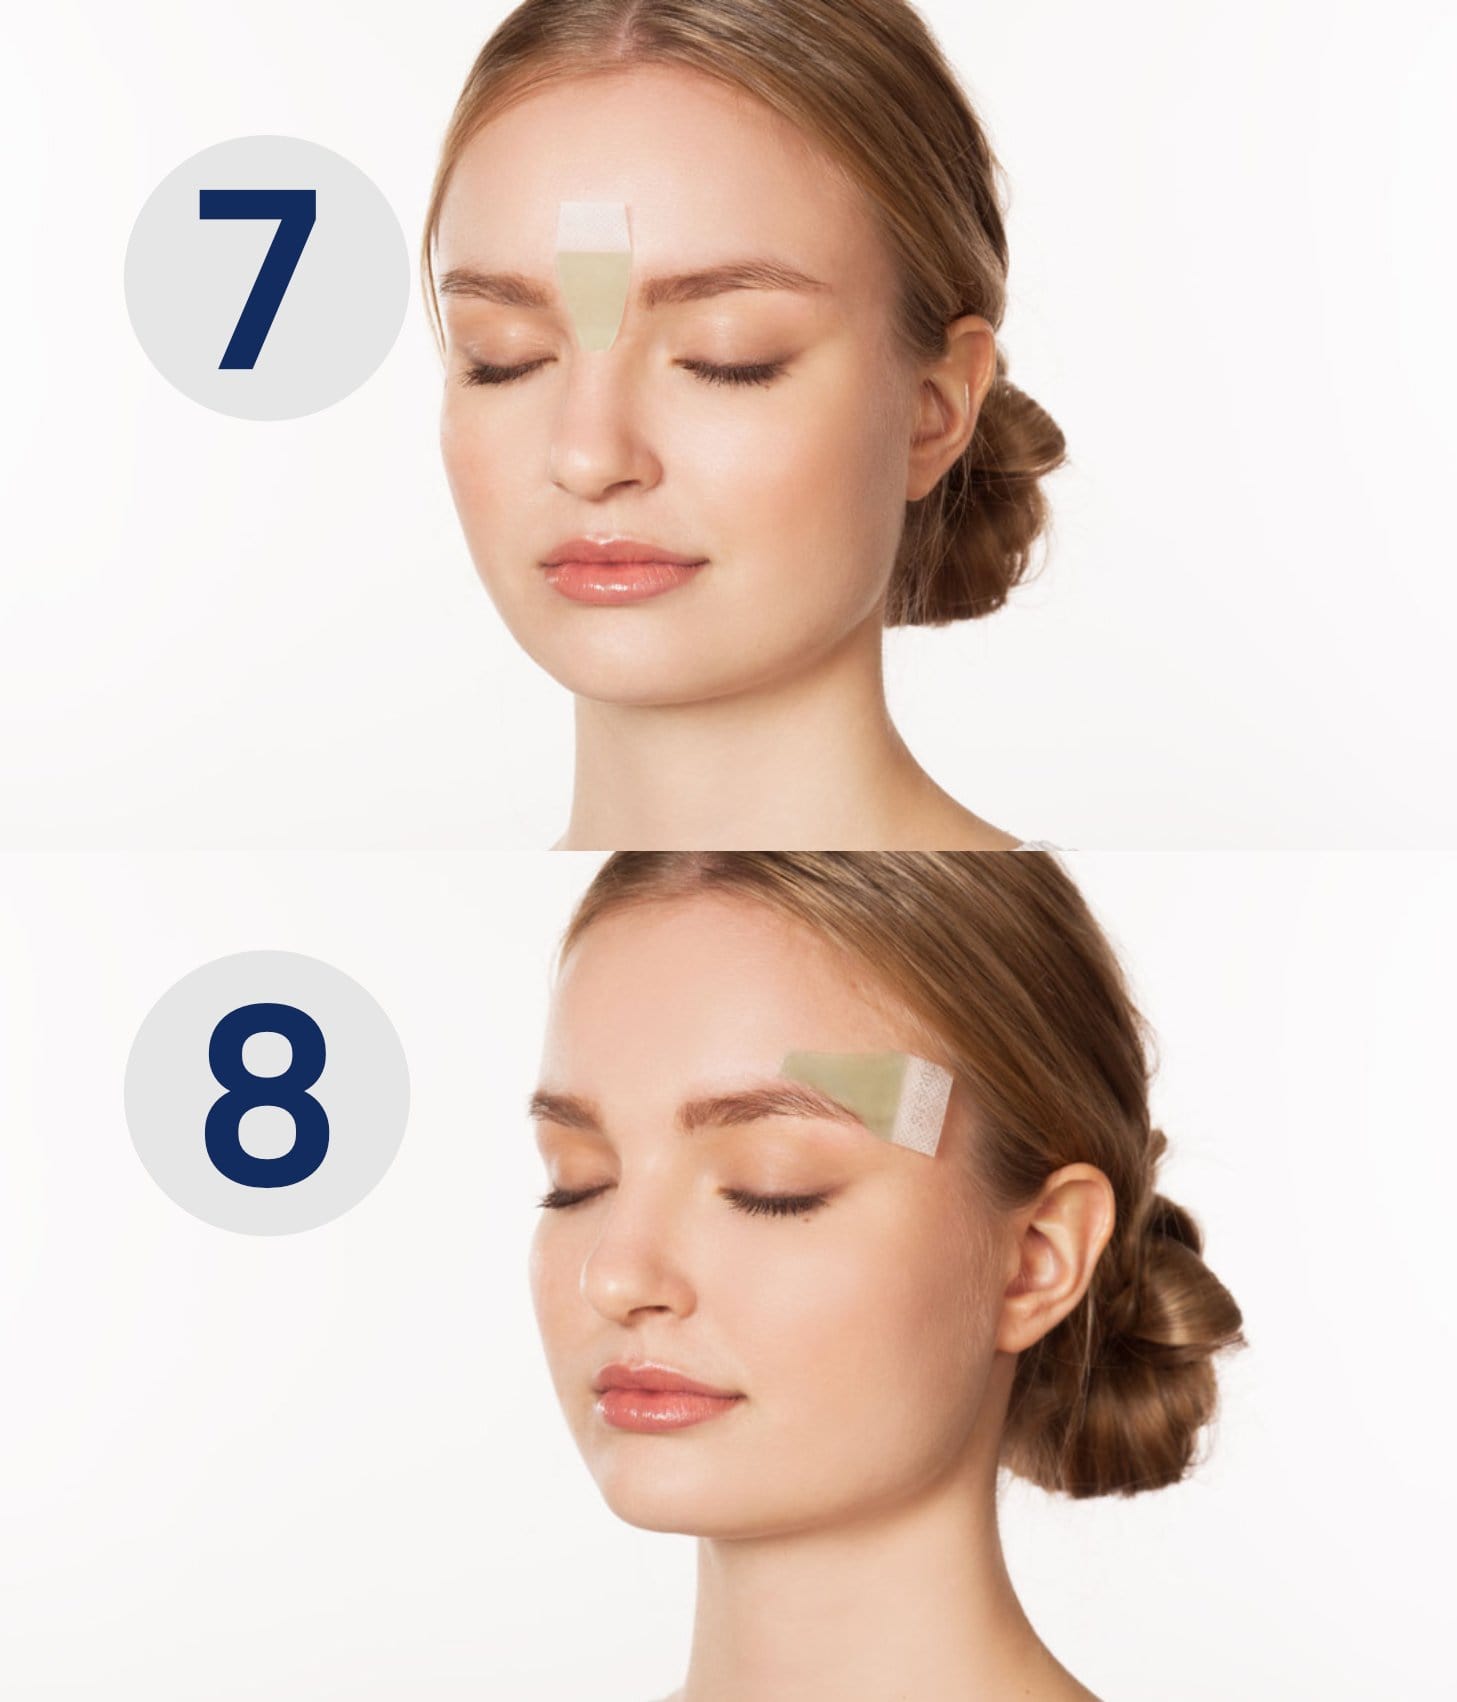 RefectOil Brow Styling Strips - Sagema